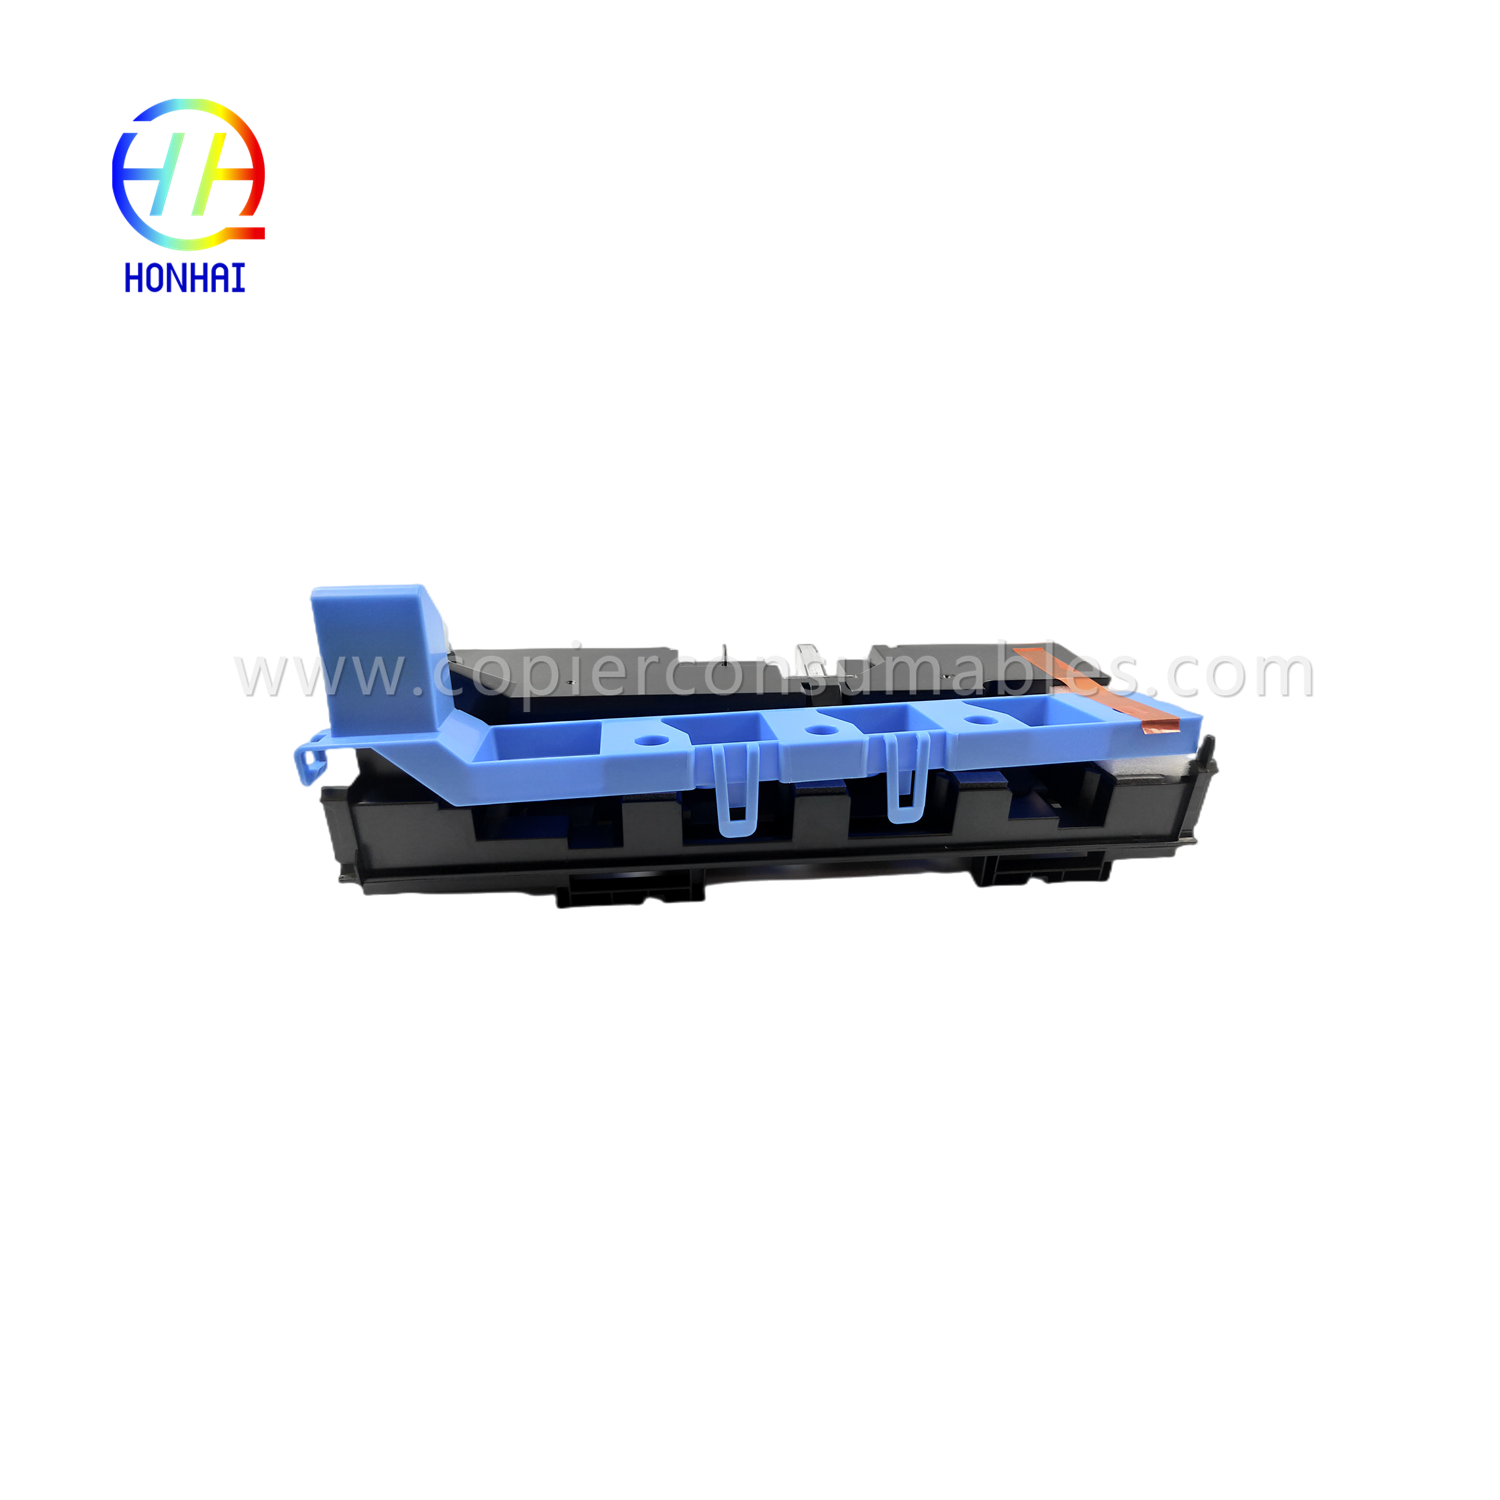 https://c585.goodao.net/waste-toner-container-for-konica-minolta-bizhub-c226-c256-c266-c227-c287-c367-c7333-c7226-c7528-wx-105-a8jwy- טאָונער קעסטל פּראָדוקט /